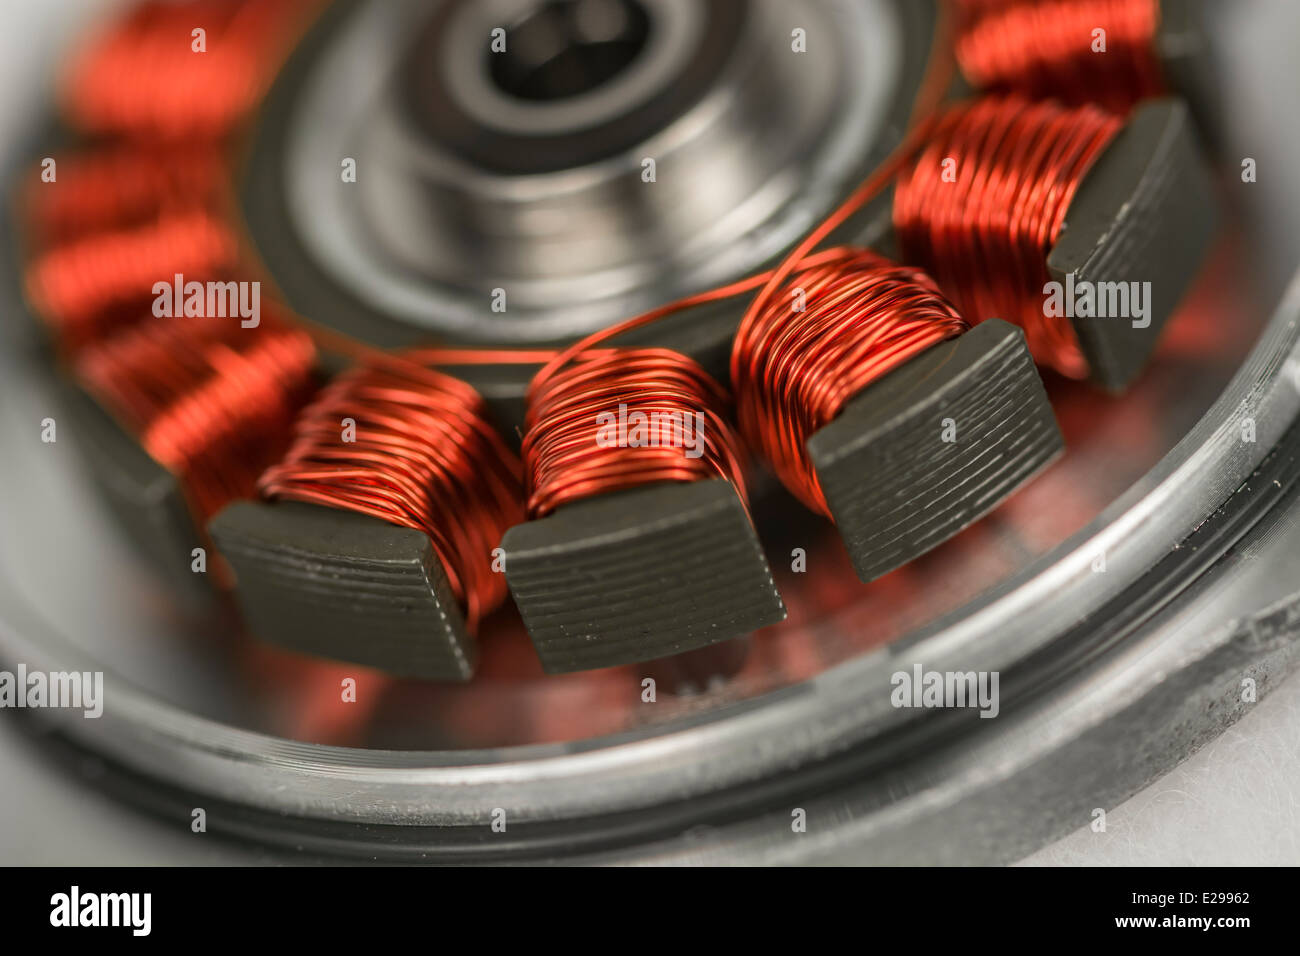 Macro photo of HDD / hard disk drive spindle motor with exposed copper stator coils. See 'description' for focus detail. Stock Photo